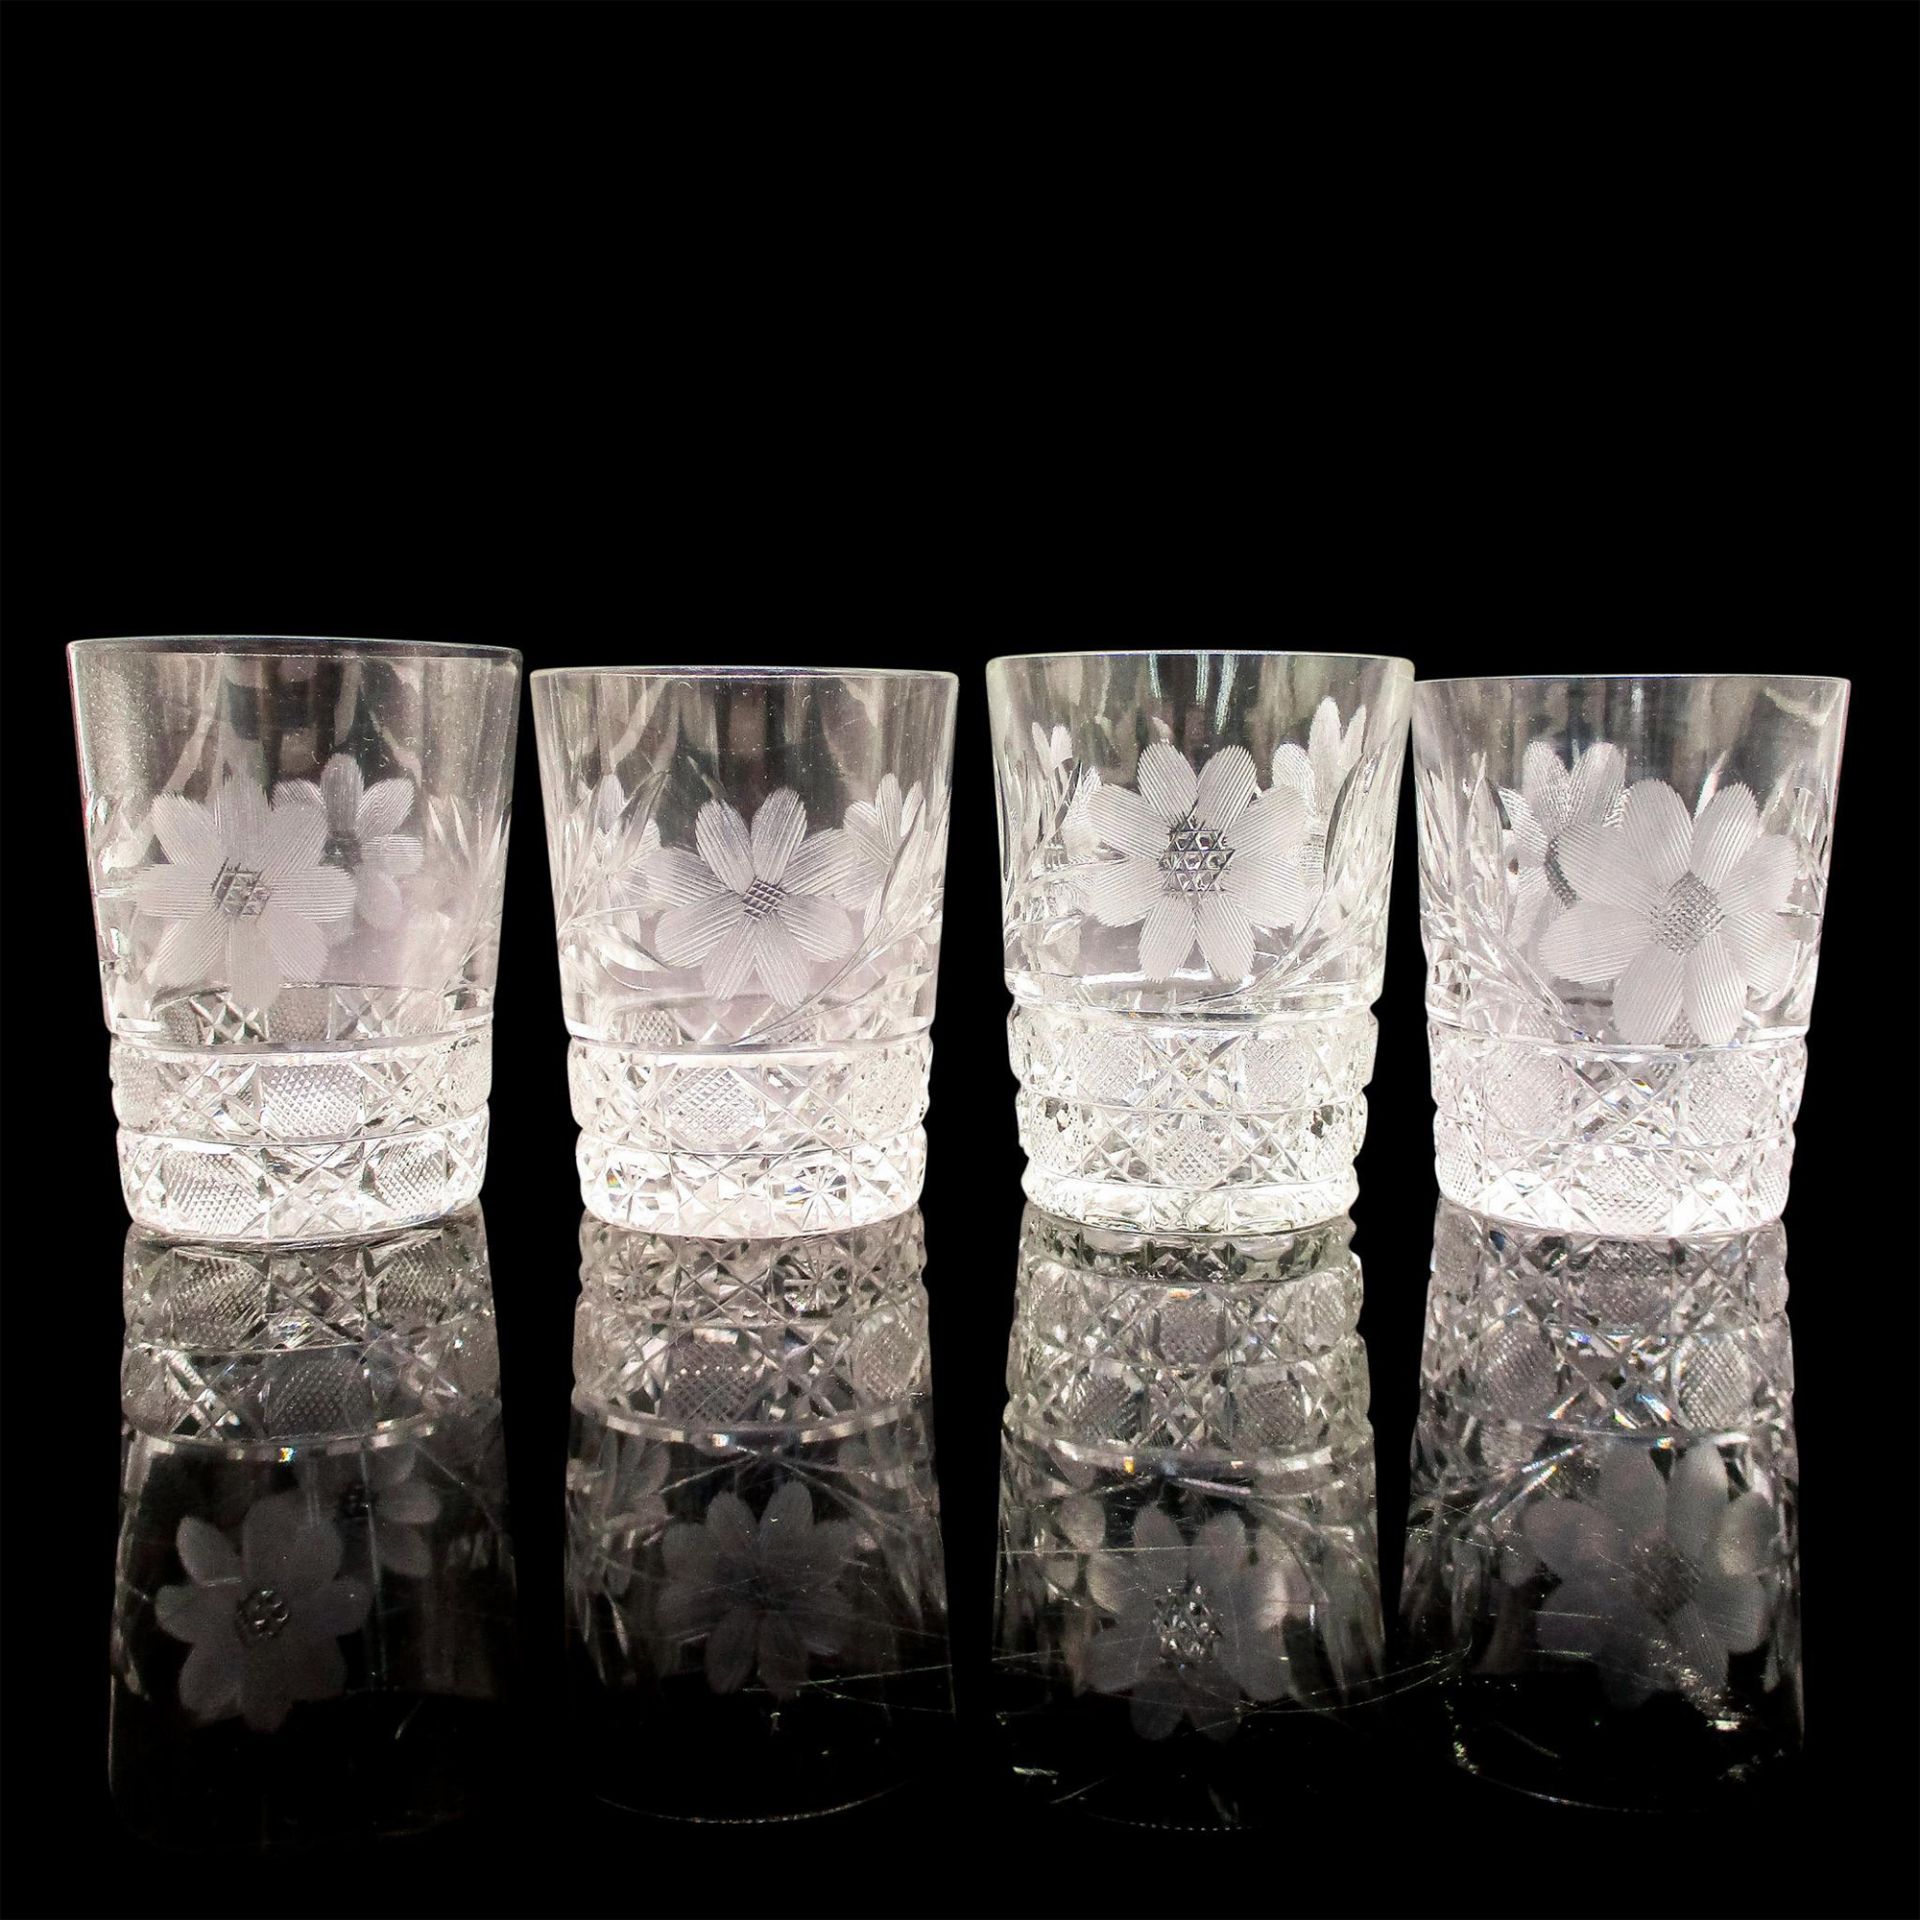 8pc Vintage Crystal Etched Whiskey Glasses - Image 6 of 8